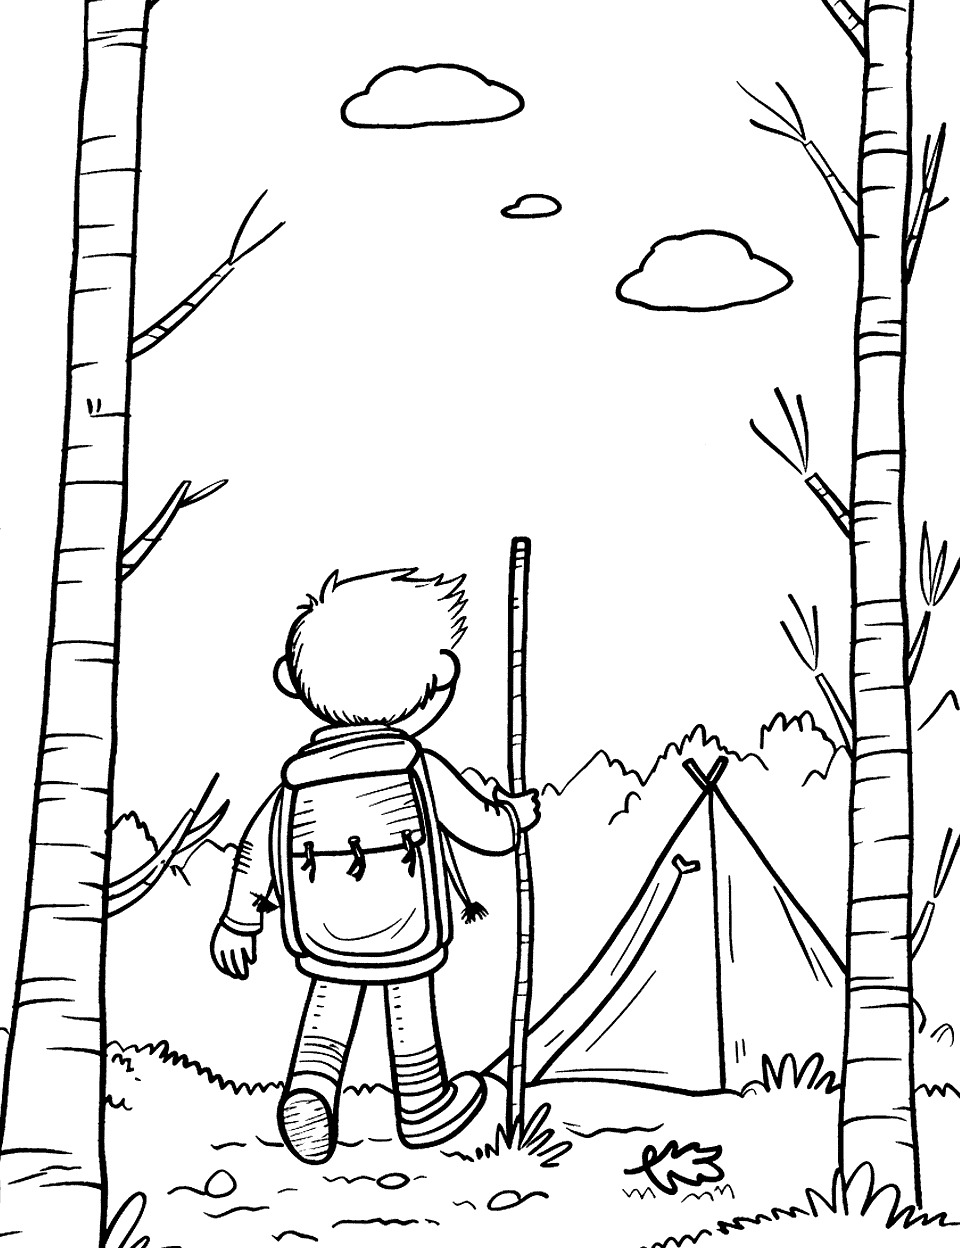 Hiking Adventure Camping Coloring Page - A child with a hiking stick in hand, walking on a trail through the woods to his tent.